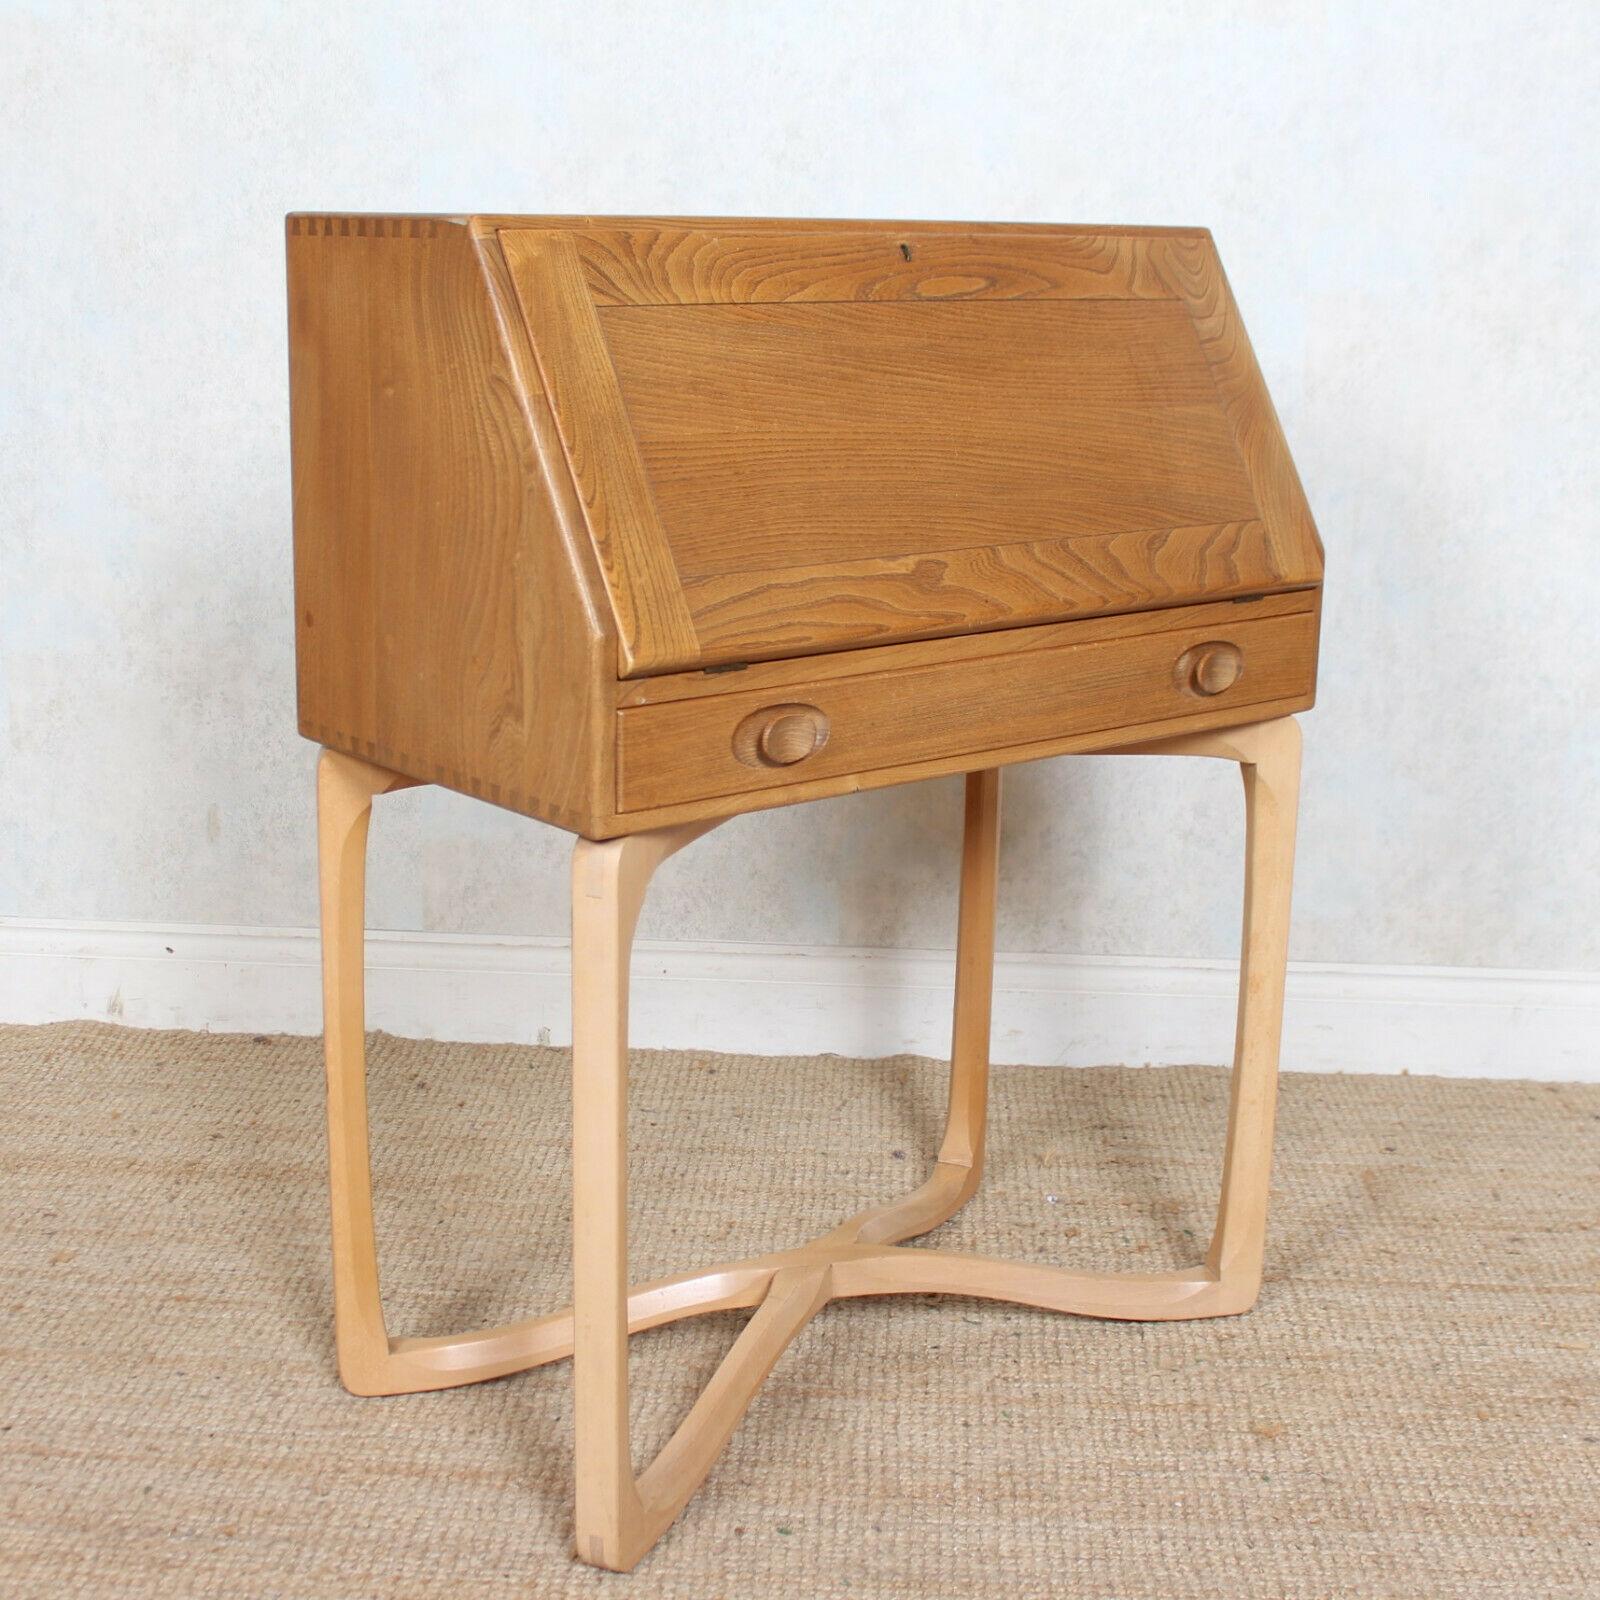 A rare opportunity to acquire an Ercol model 518 bureau.
The solid elm carcass boasting a well figured grain with sloping fall front enclosed pigeon holes and shelving above a long fitted drawer mounted with good handles, dovetailed jointing and